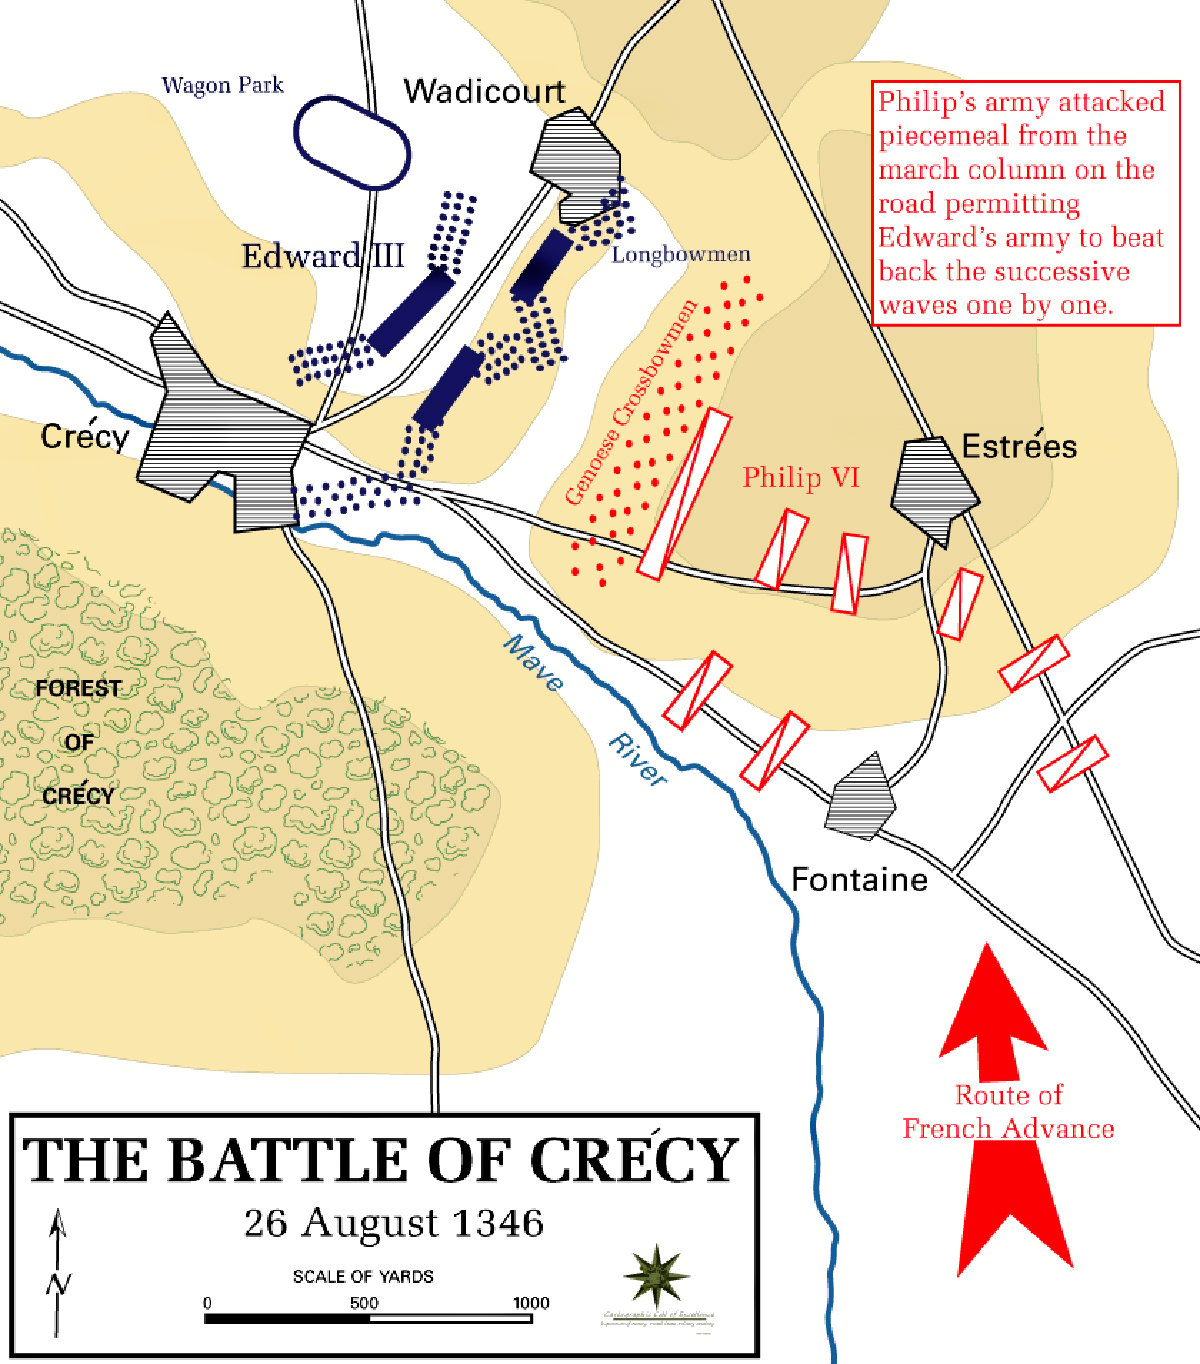 Illustrative map showing the deployment and movements during the Battle of Crécy. The English forces under Edward III are positioned near the town of Crécy, with longbowmen marked in blue. Philip VI's French troops, shown with red arrows, advance from the northeast near Estrées. Terrain features like the Forest of Crécy and the Maye River are depicted, alongside directional arrows indicating the French attack routes. A note explains how the French attacked in waves, which Edward's army repelled successively. The title 'THE BATTLE OF CRÉCY, 26 August 1346' is displayed prominently with a scale of yards.